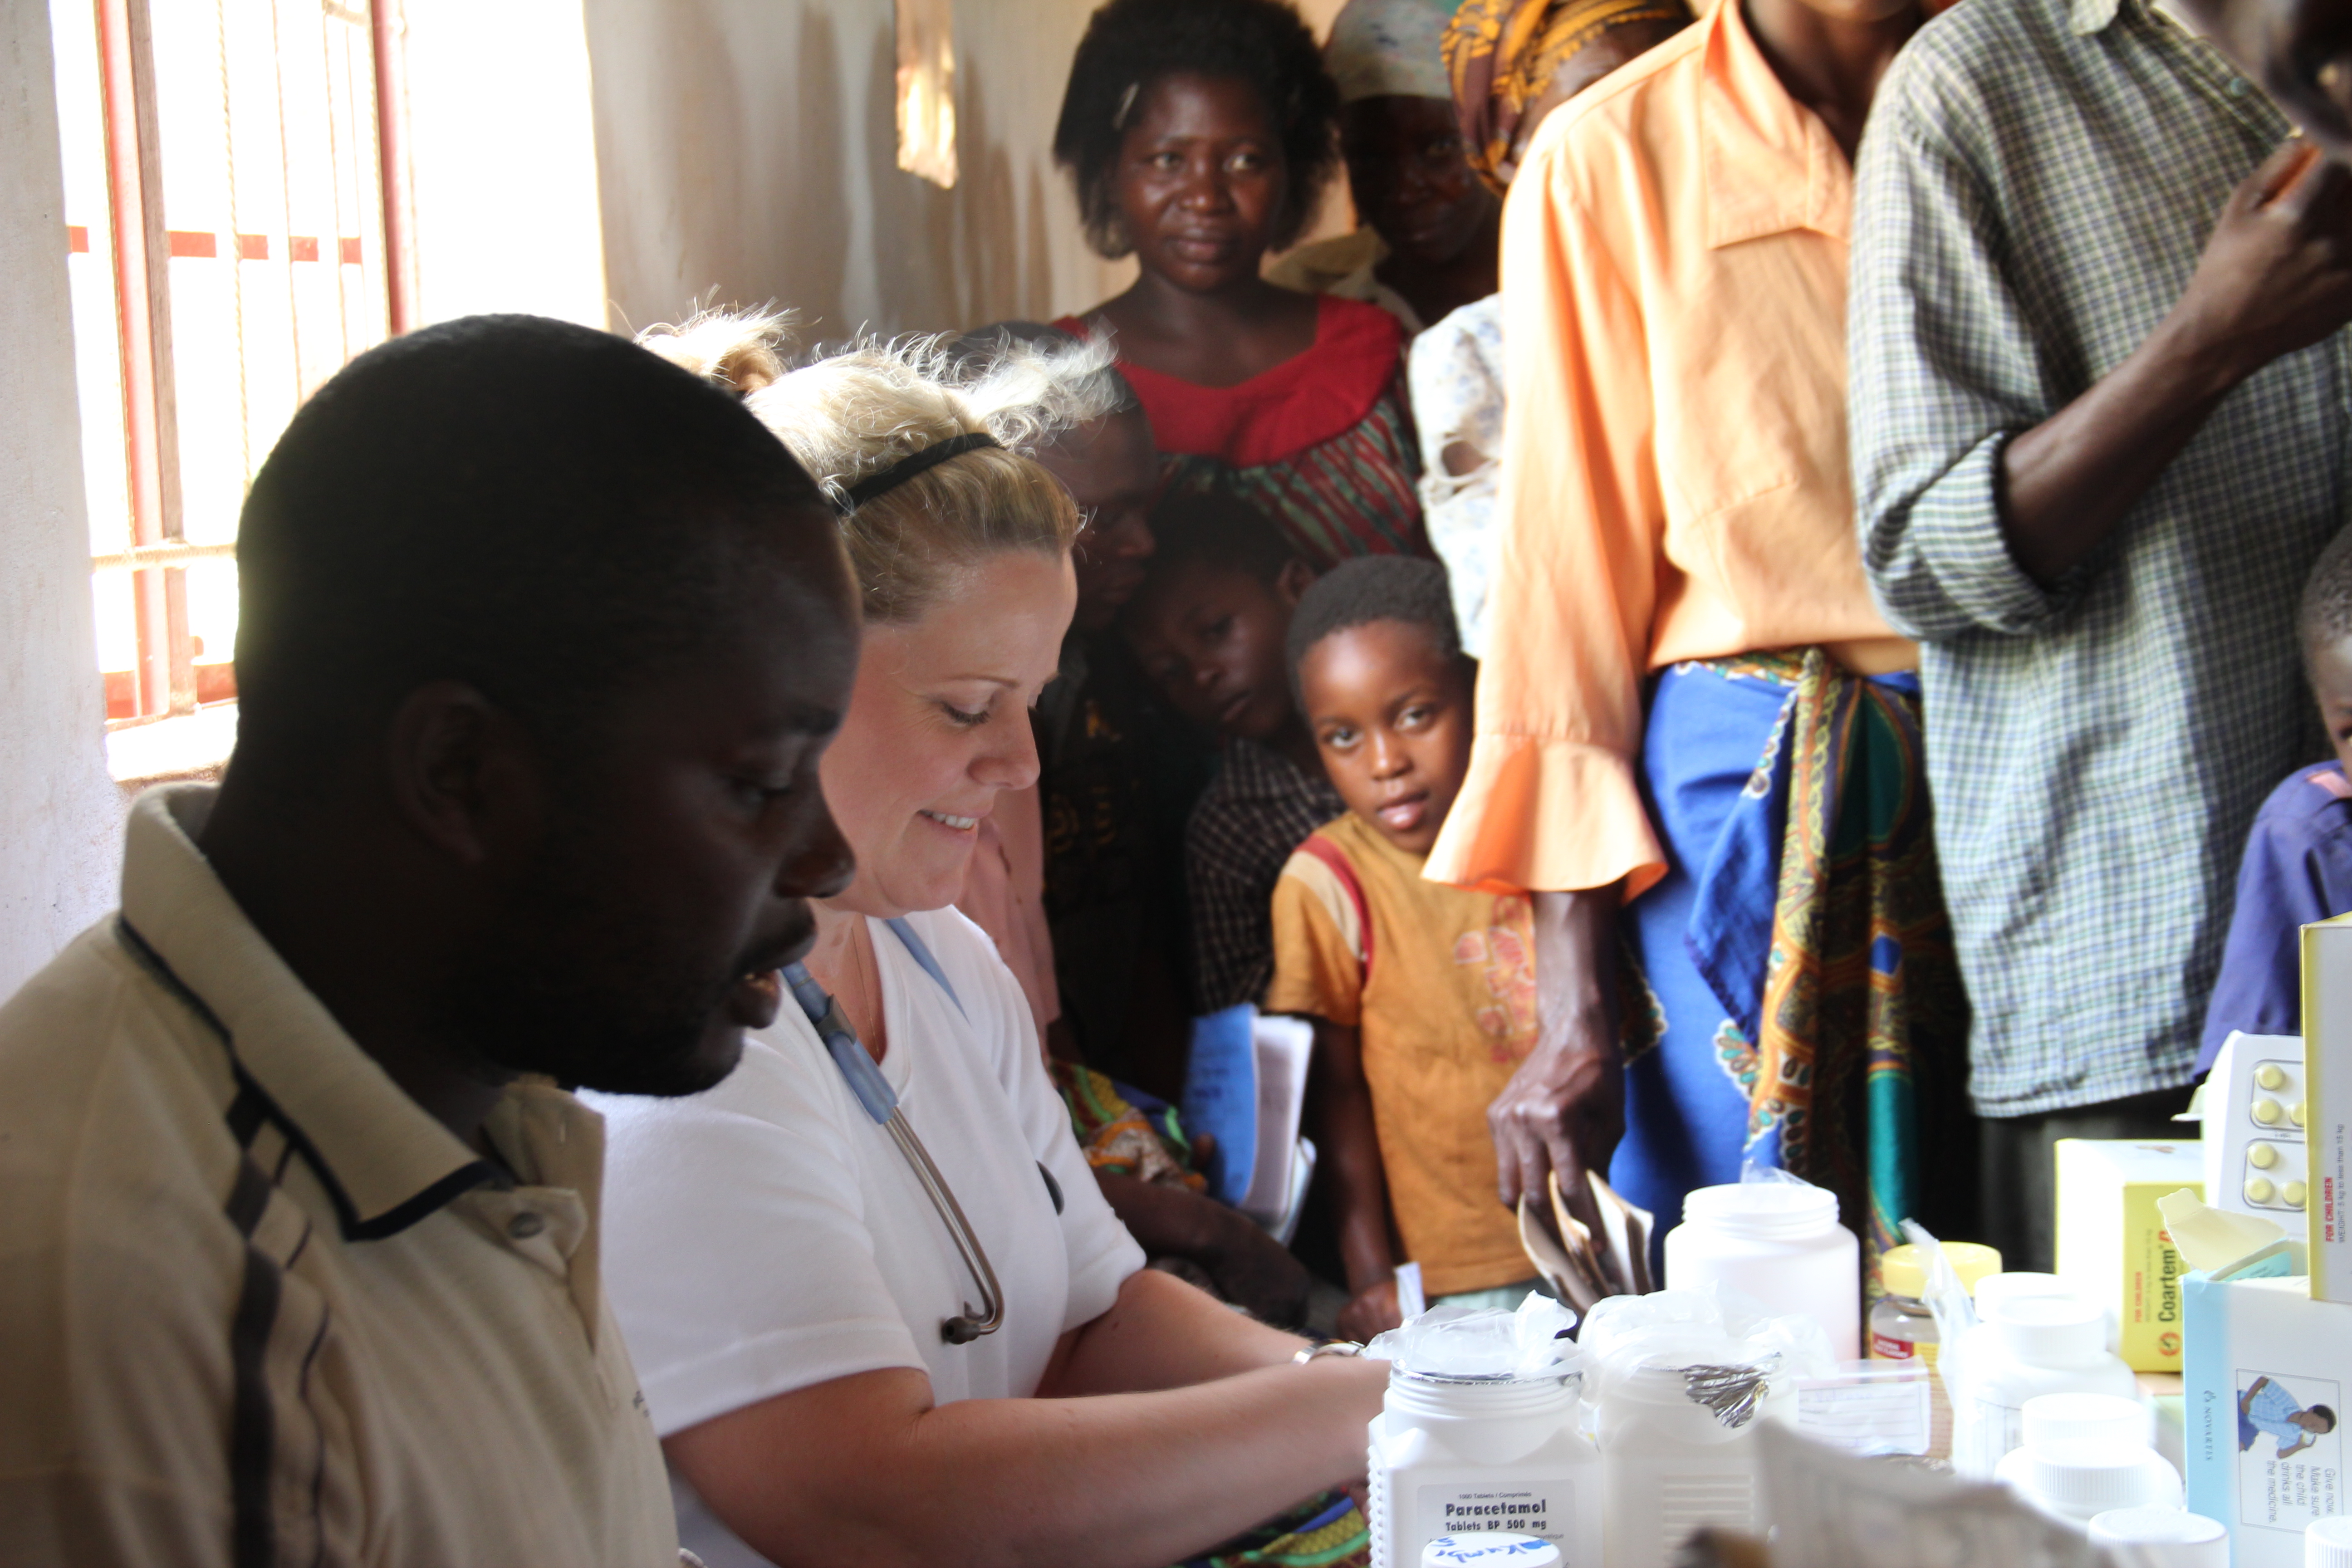 Vicki Jenkins working with Malawi citizens at a nurses station